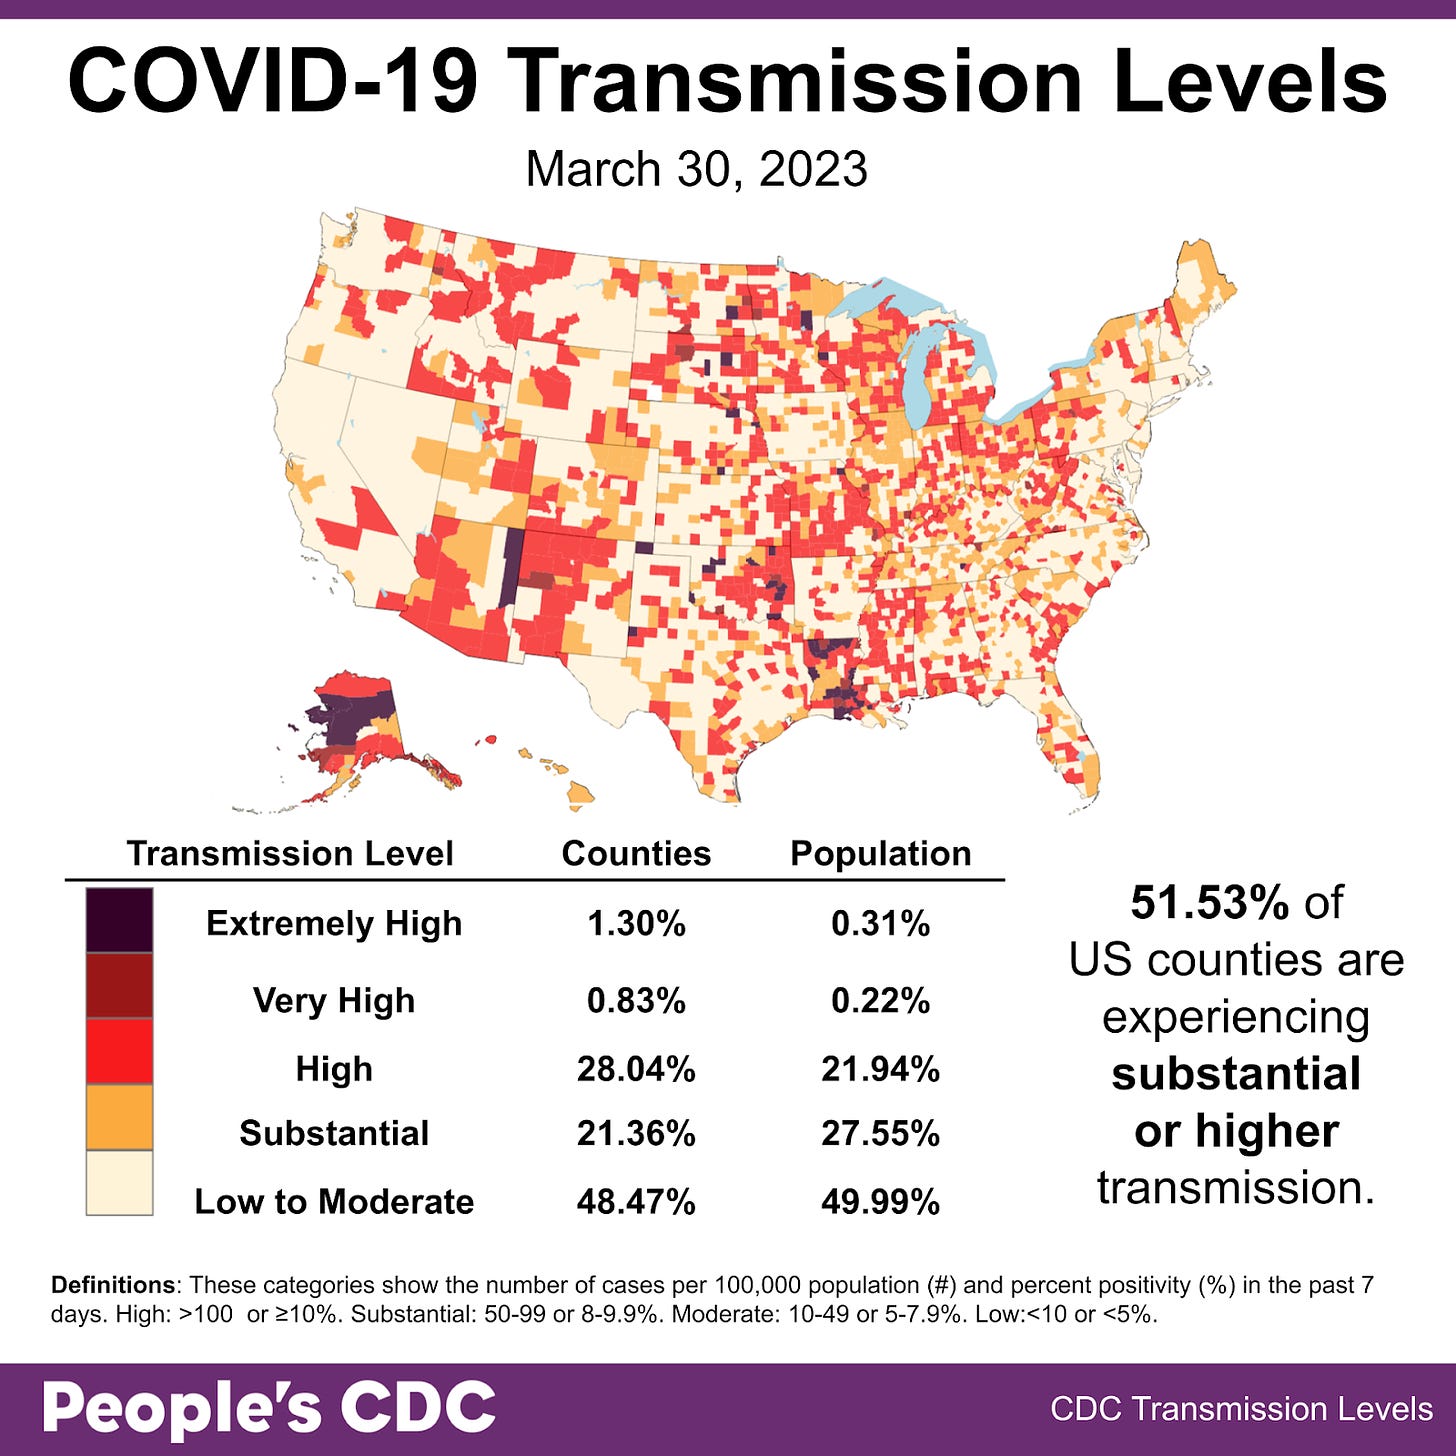 Map and table show COVID transmission levels by US county as of Mar 30, 2023 based on the number of COVID cases per 100,000 population and percent positivity in the past 7 days. Low to Moderate levels are pale yellow, Substantial is orange, High is red, Very High is brown, and Extremely High is black. The US shows a mix of mainly red and orange, with areas of lighter yellow on the west coast as well as portions of the Northeast. Text in the bottom right: 51.53 percent of the US population lives in an area with substantial or higher transmission. Transmission Level table shows 1.30 percent of counties (0.31 percent by population) as Extremely High, 0.83 percent of the counties (0.22 percent by population) as Very High, 28.04 percent of counties (21.94 percent by population) as High, 21.36 percent of counties (27.55 percent by population) as Substantial, and 48.47 percent of counties (49.99 percent by population) as Low to Moderate. The People's CDC created the graphic from CDC data.